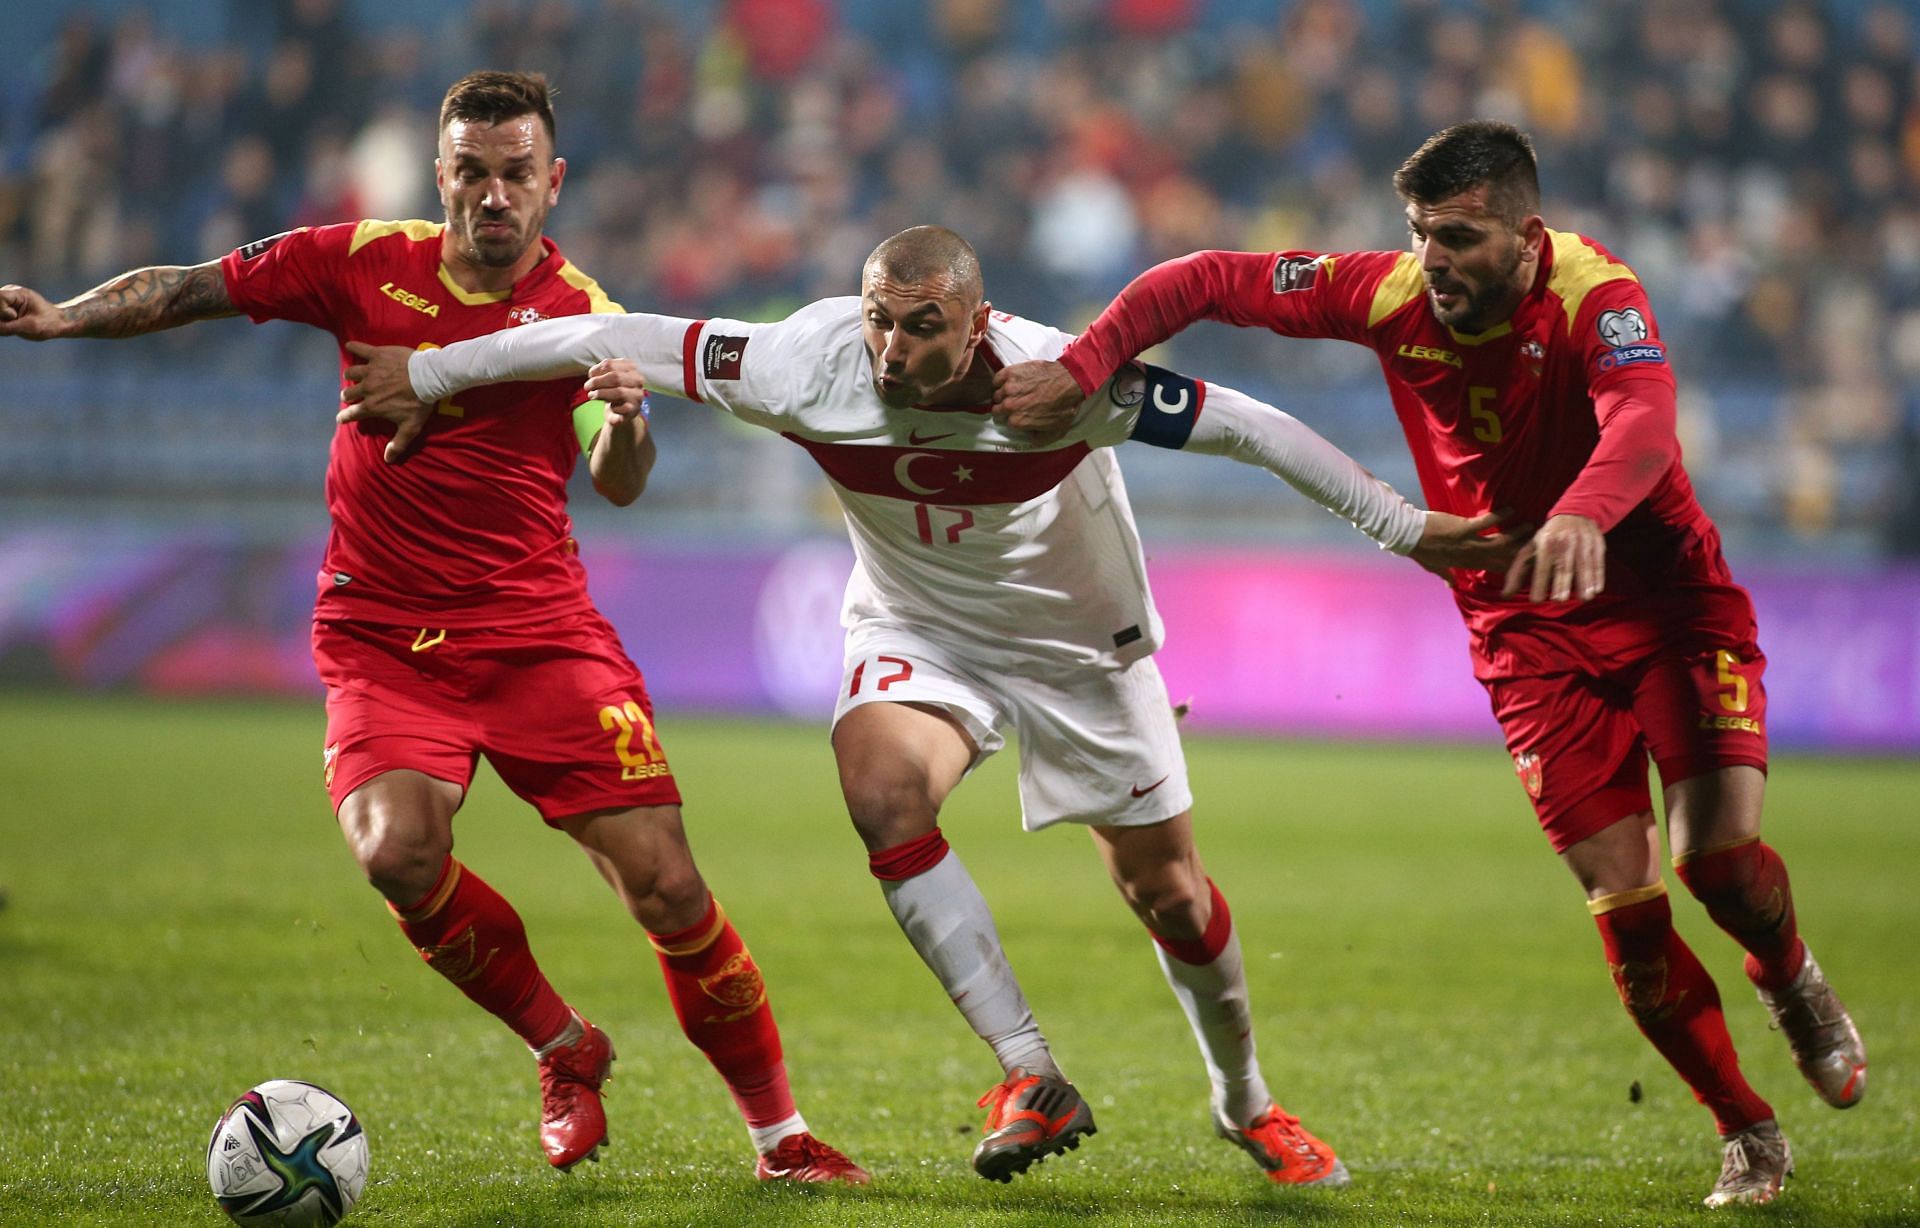 Montenegro vs Finland prediction, preview, team news and more | UEFA Nations League 2022 - Sportskeeda